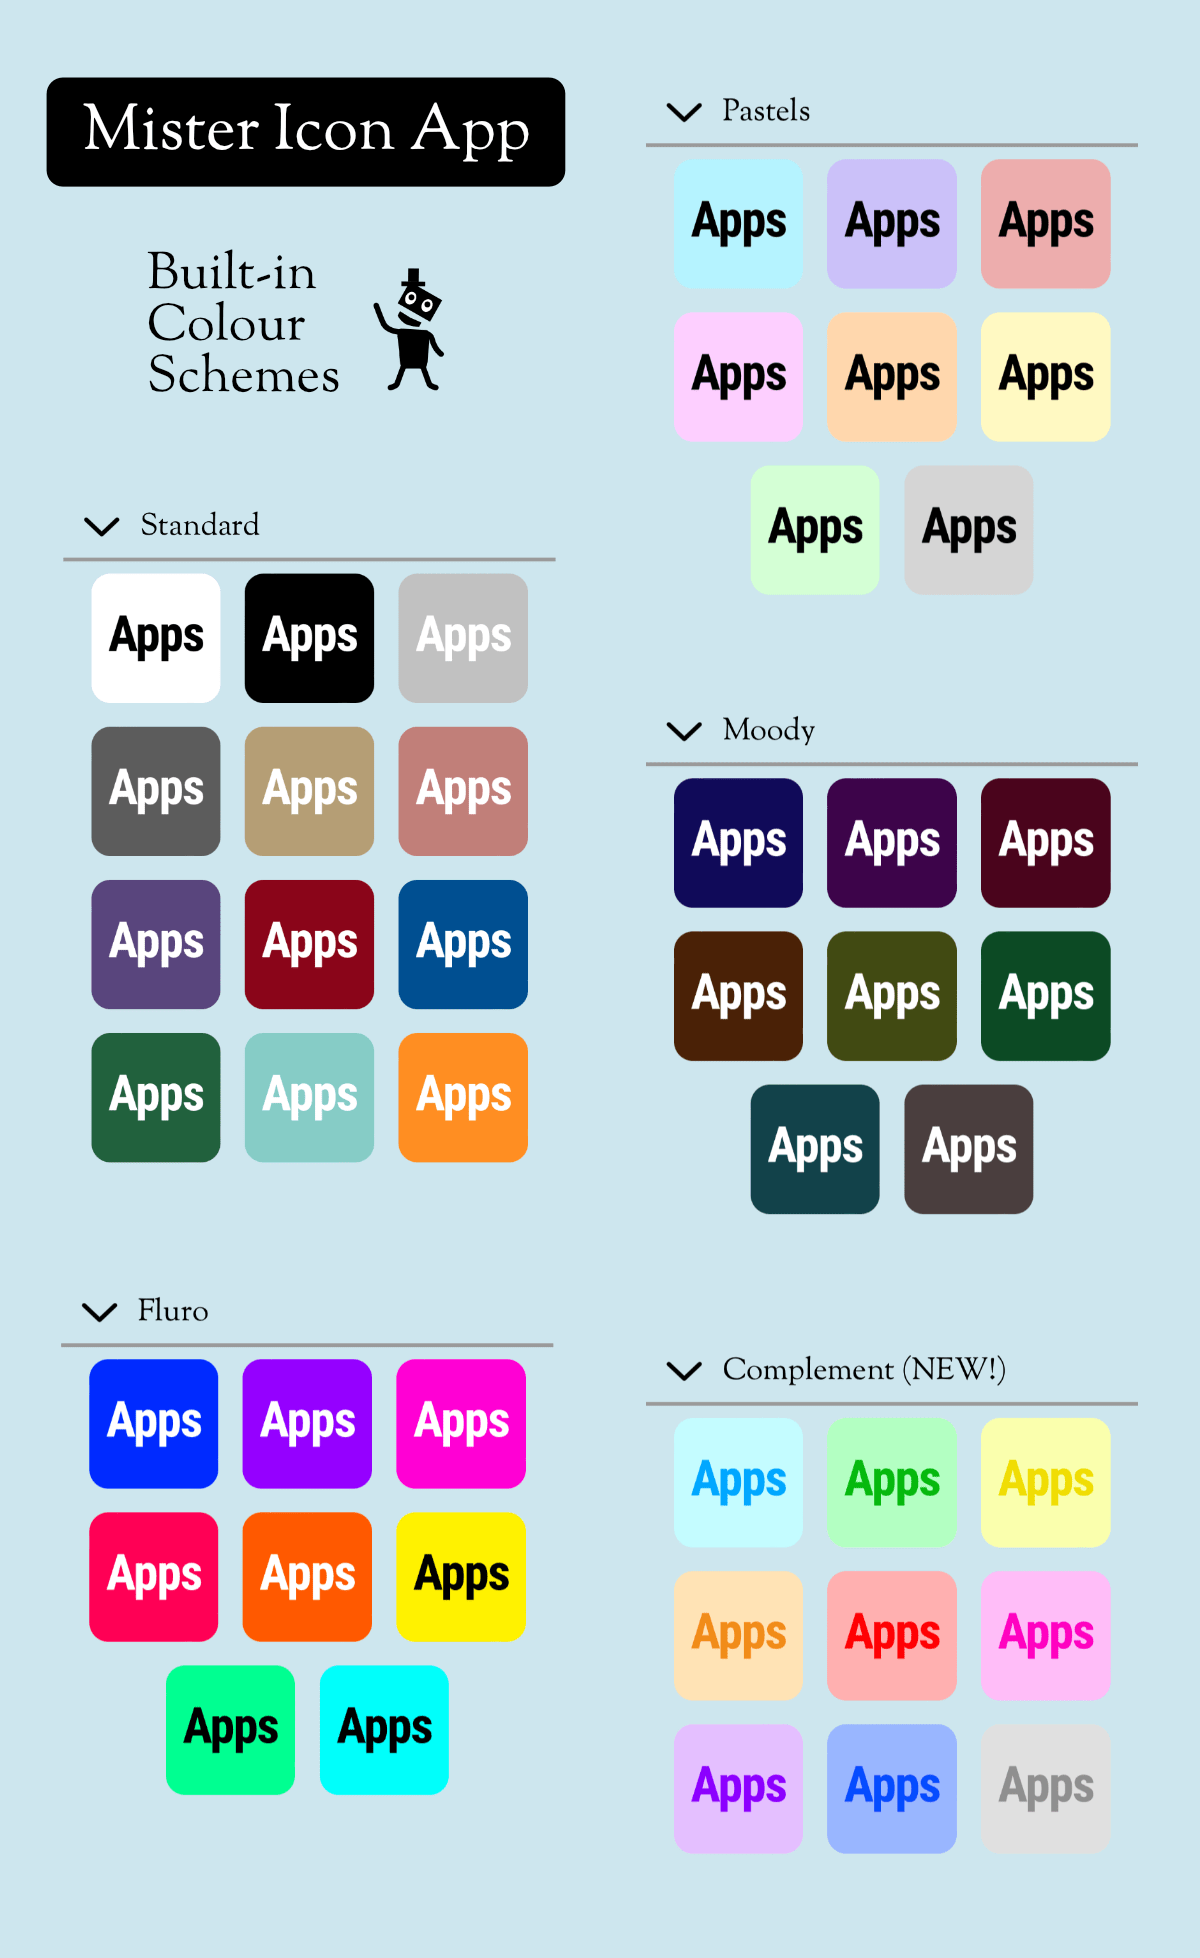 Colour schemes in the Mister Icon app